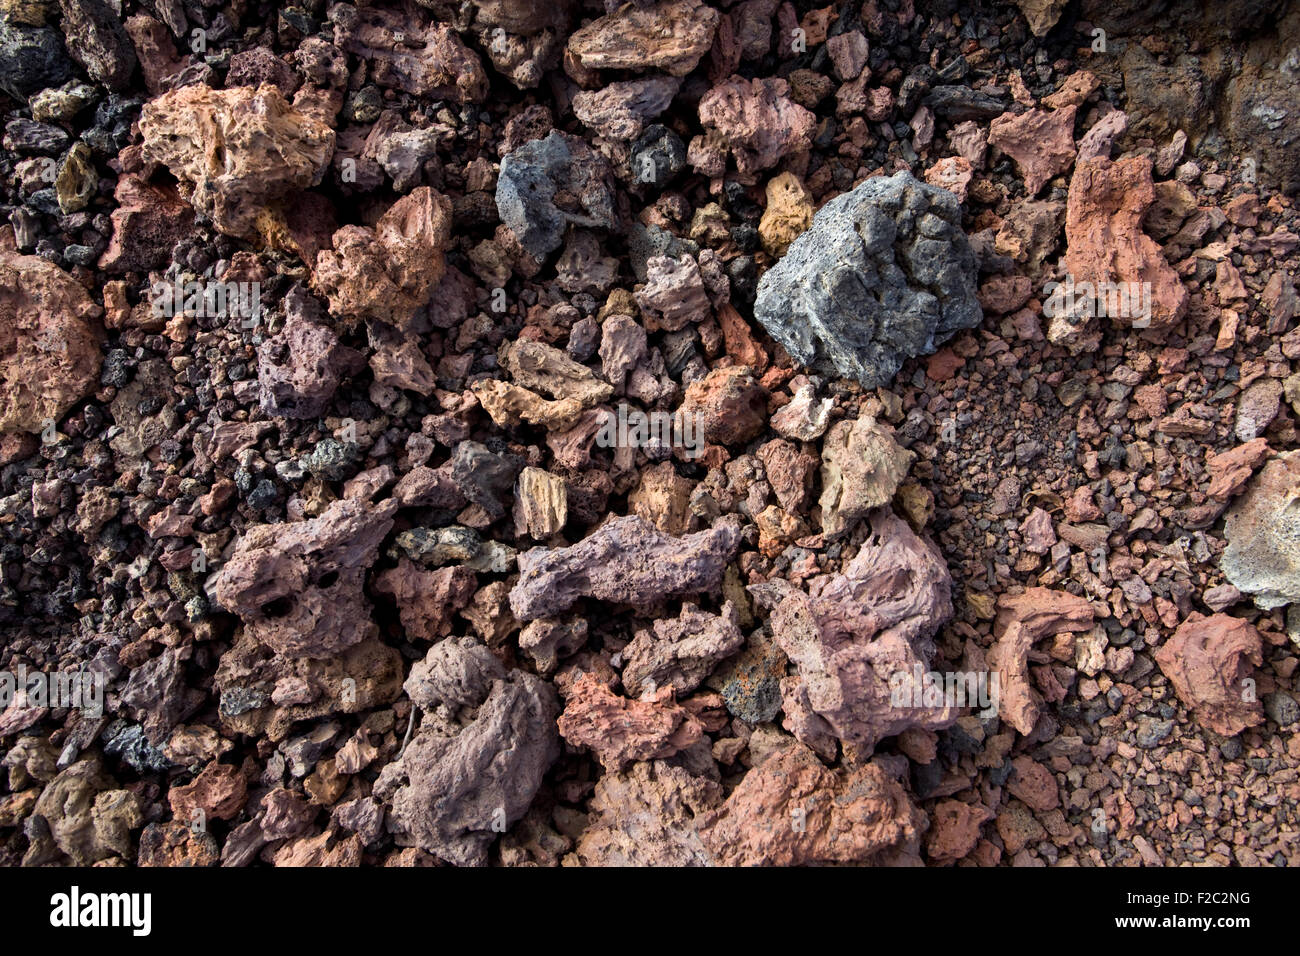 Volcanic soil and stone texture at Fuencaliente, La Palma, Canary Islands, Spain Stock Photo